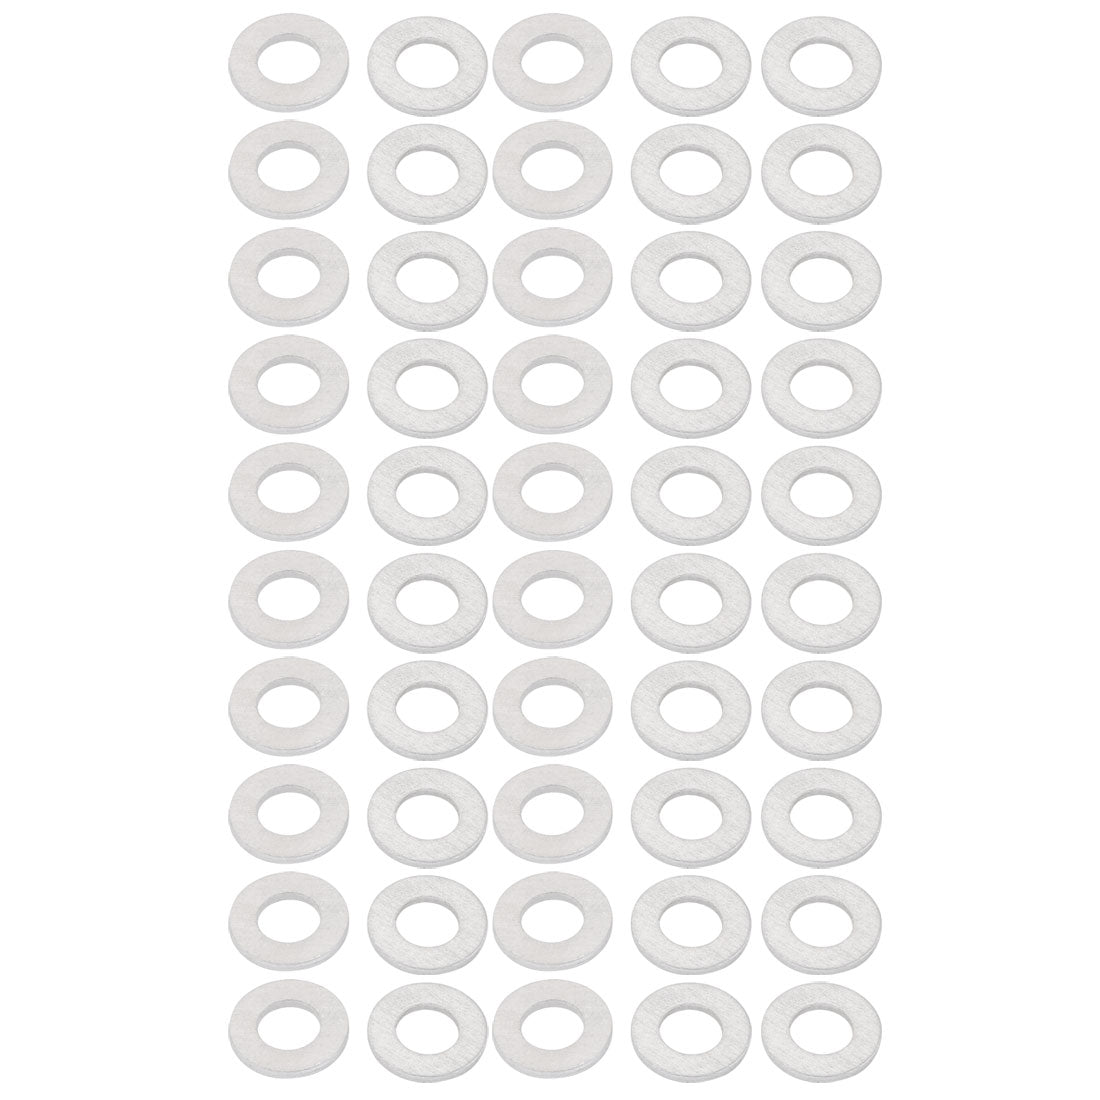 uxcell Uxcell 7mmx15mmx1mm Motorcycle Hardware Drain Plug Crush Aluminum Washer Seals 50pcs